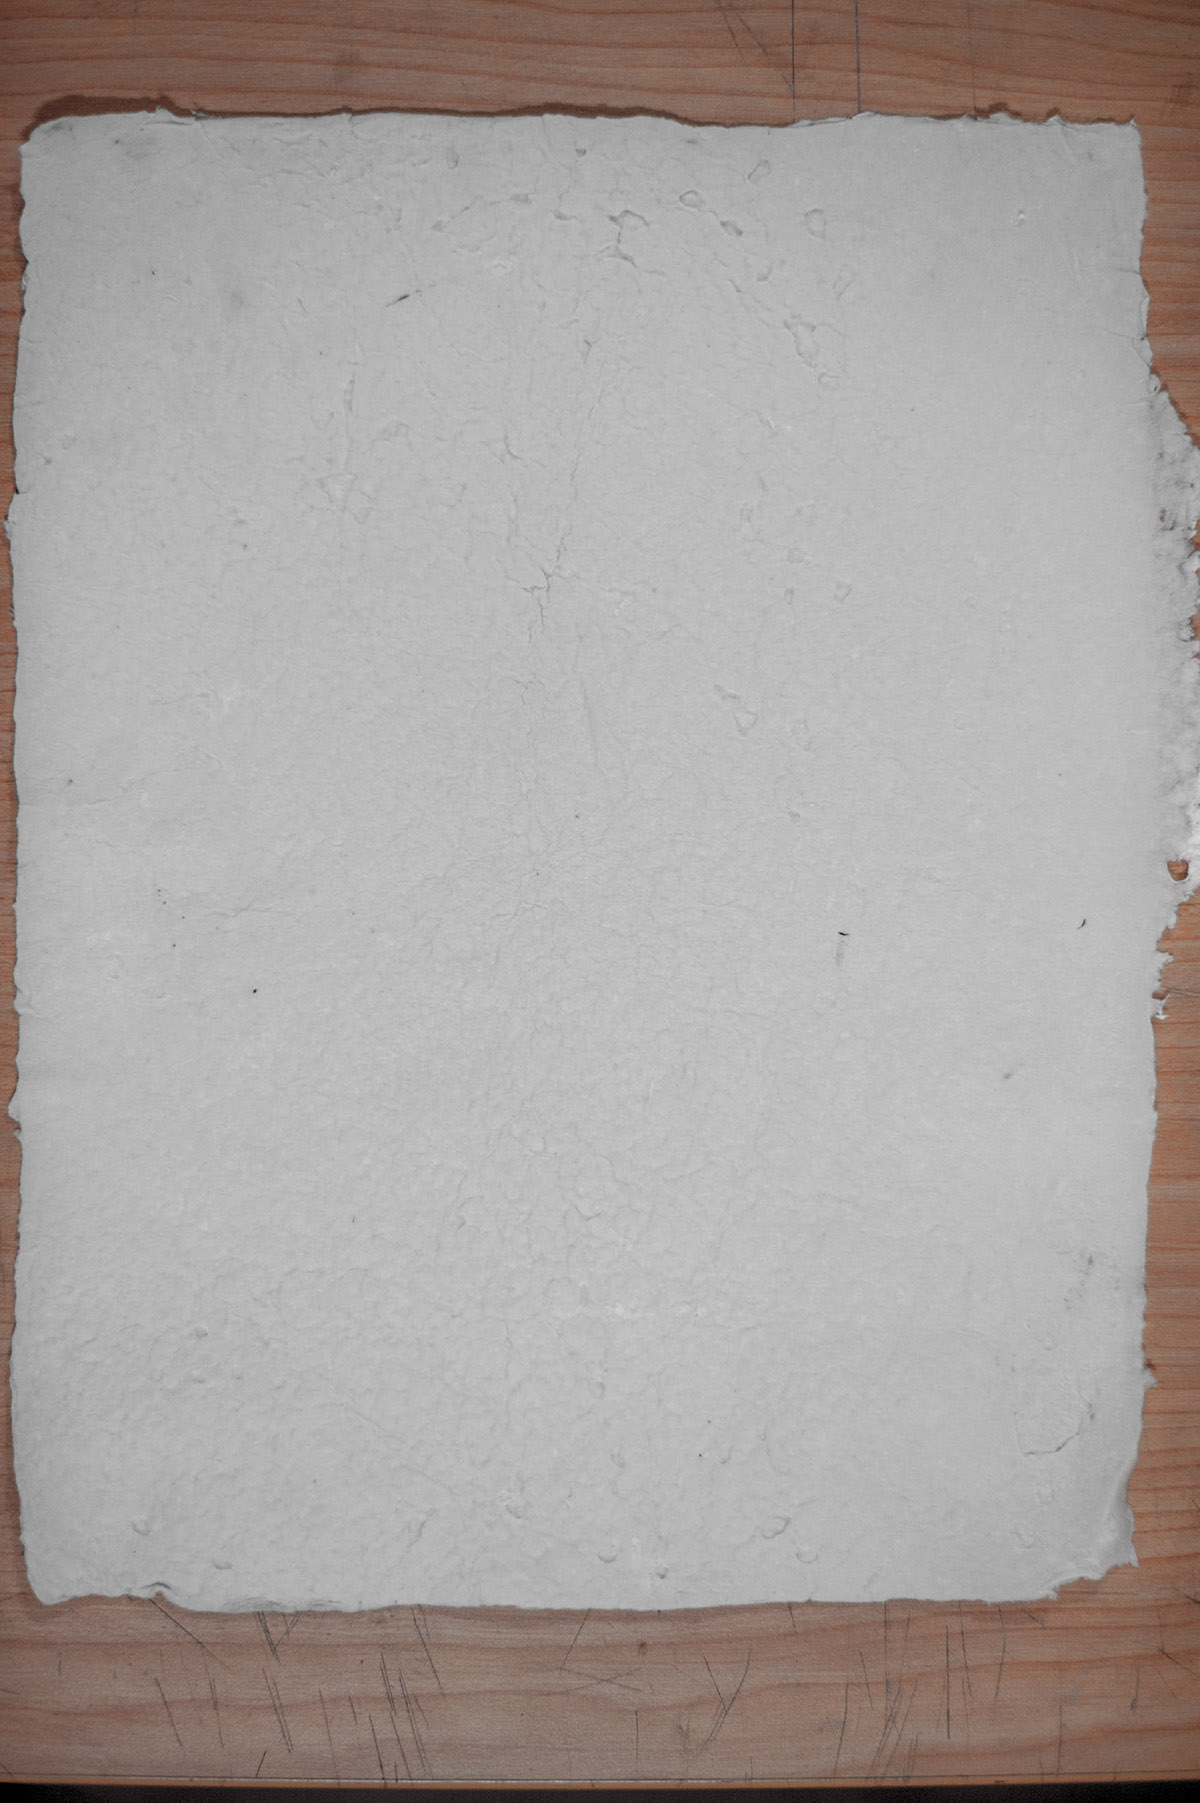 time risd conceptual accumulation PAPERMAKING ambiguity absurdity